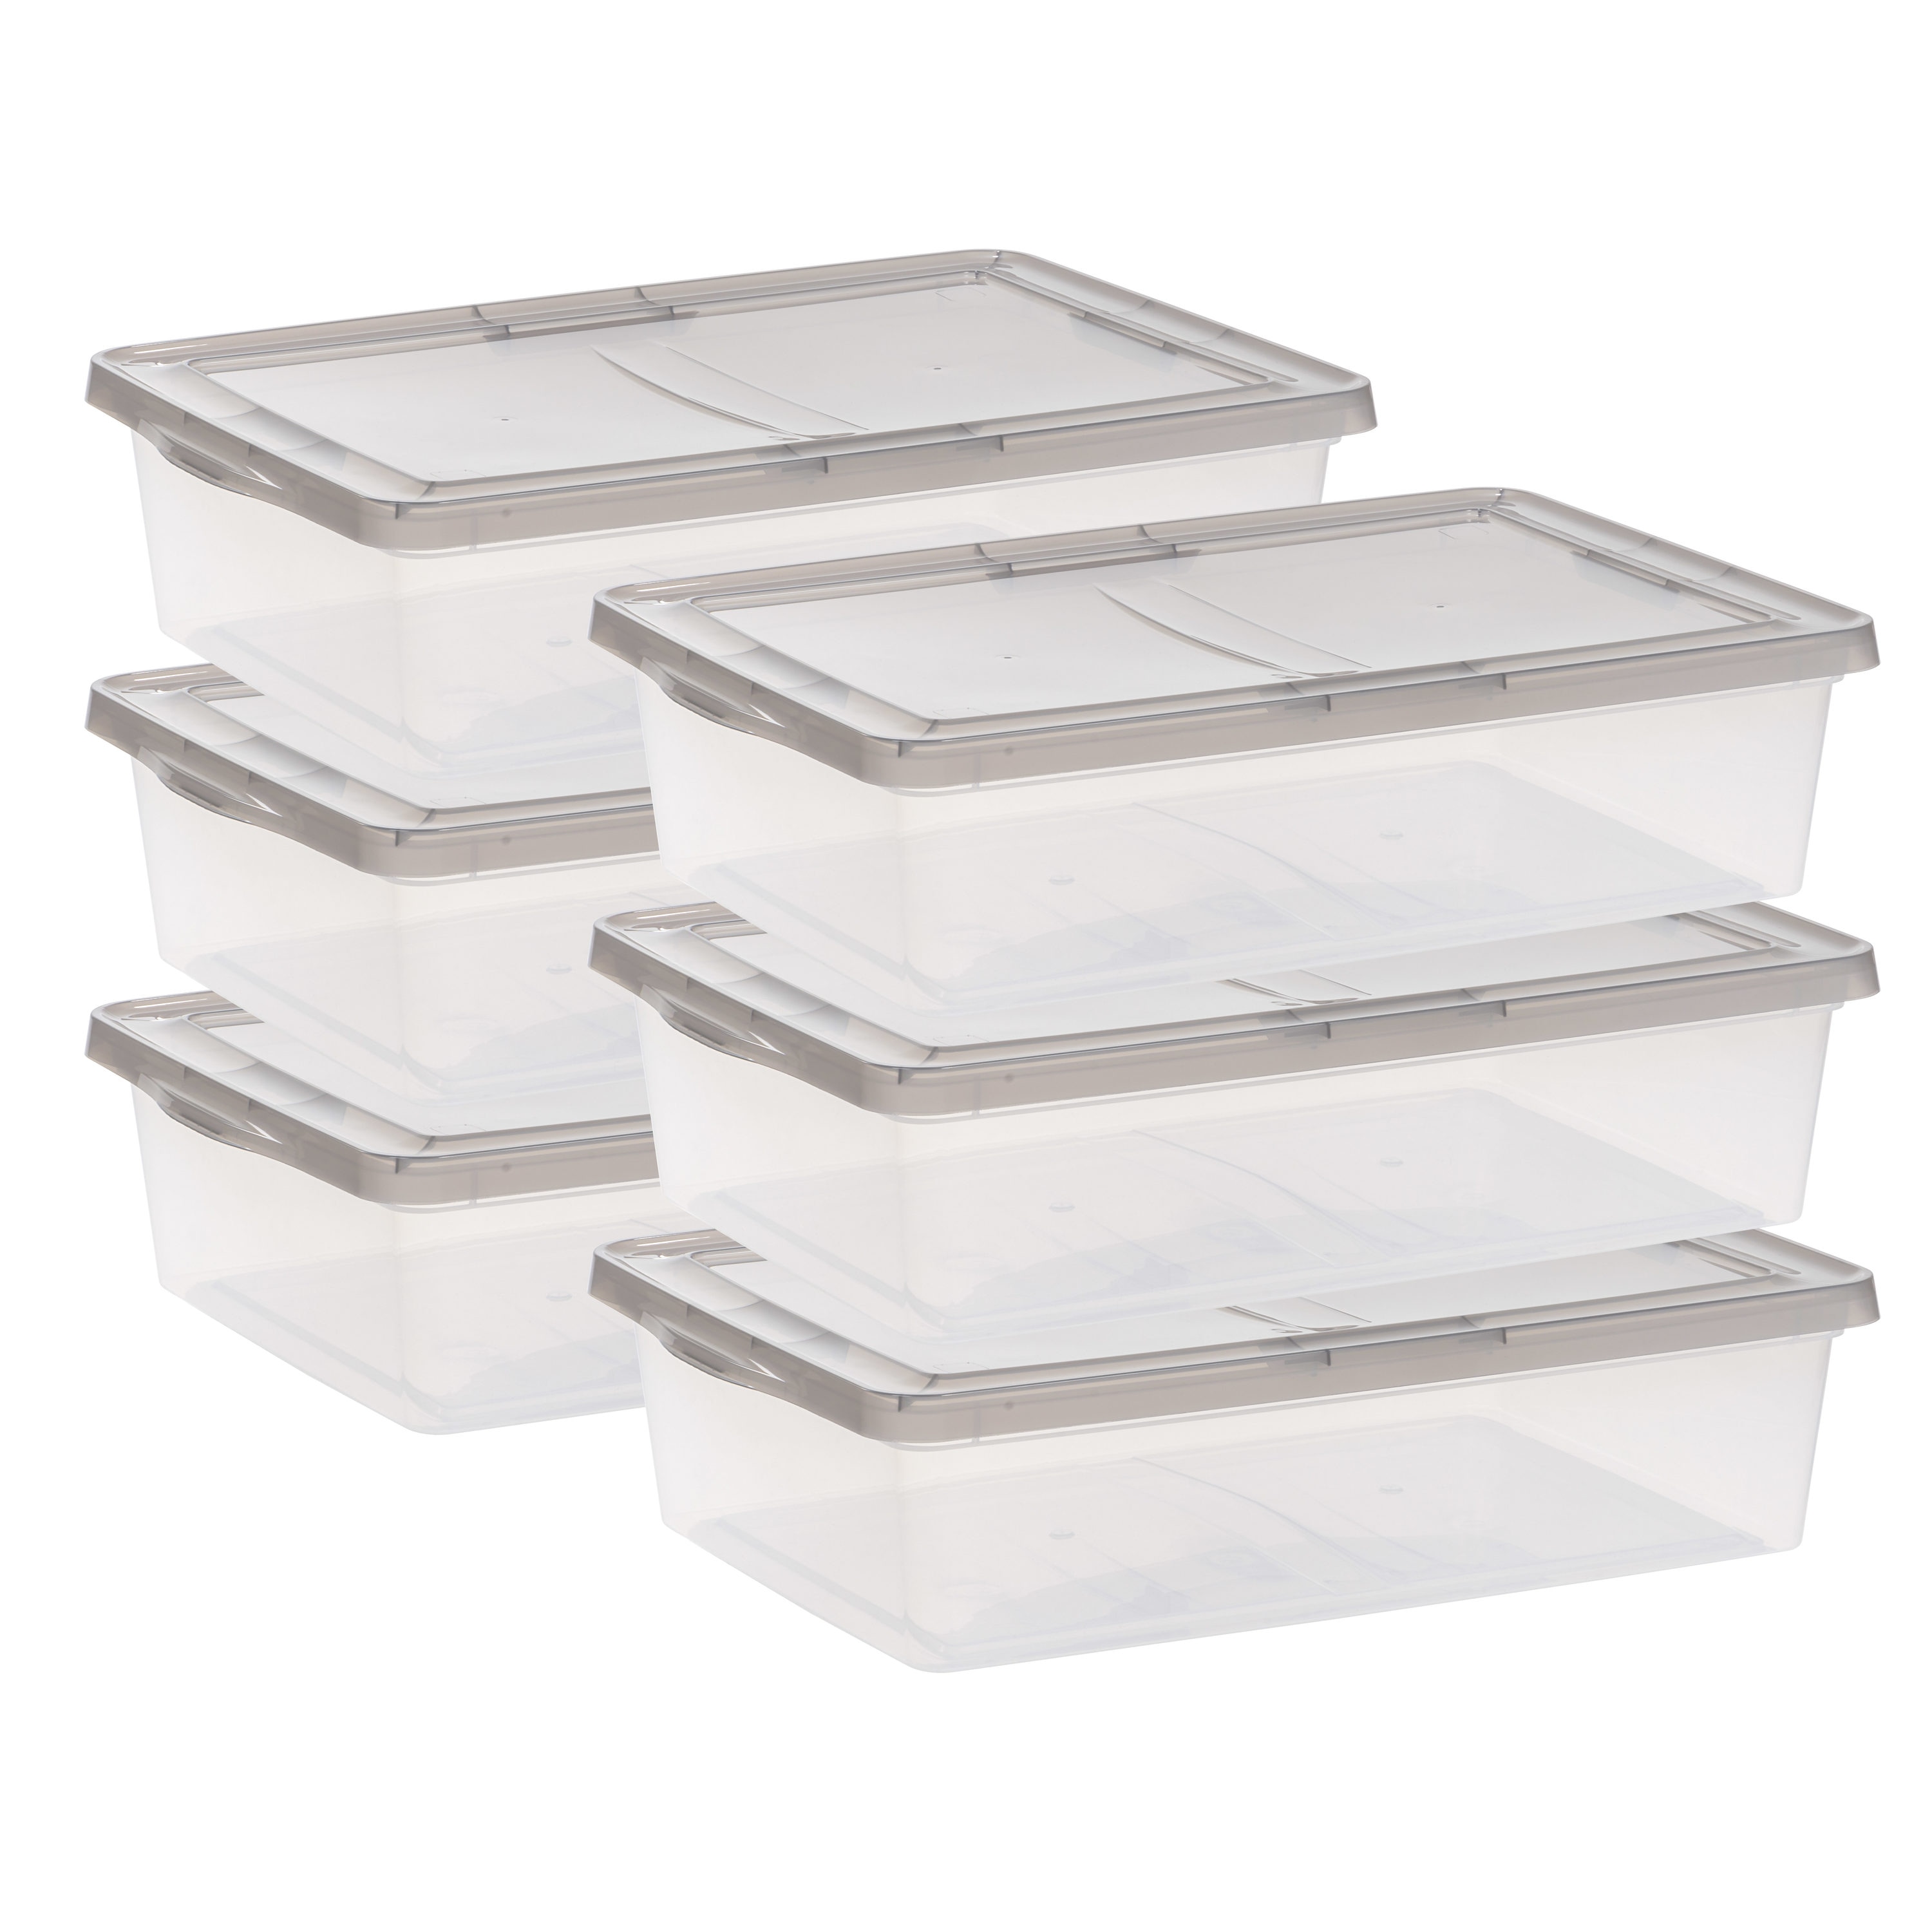 7 Gallon Snap Top Plastic Storage Box, Clear Wih Gray Lid, Pack of 6